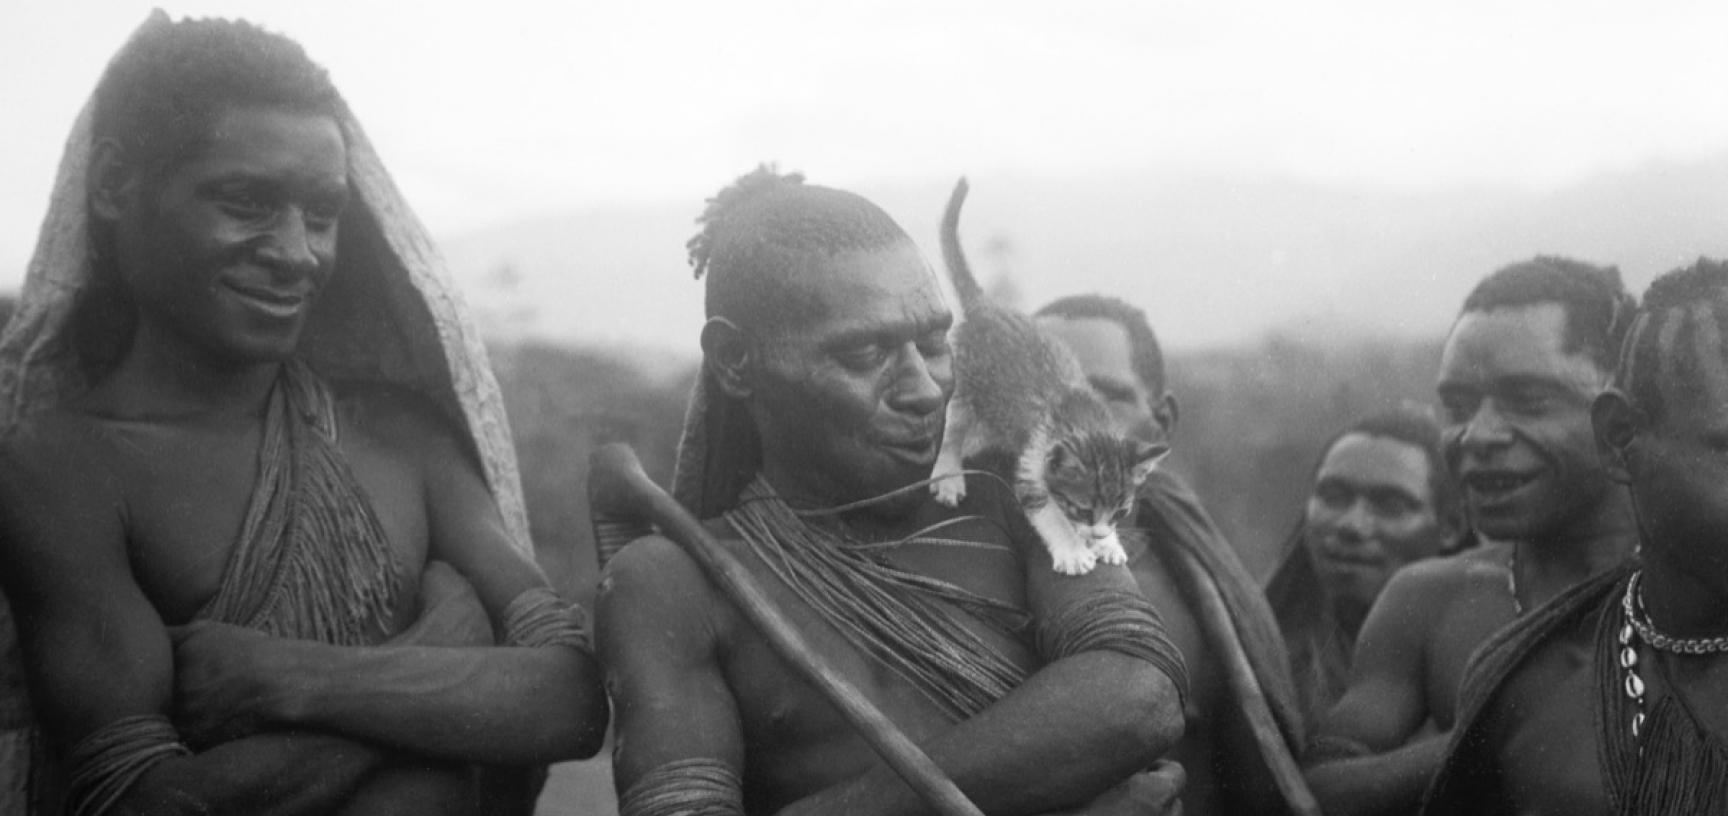 Various warriors of the Anga people with a cat standing on the shoulders of the central figure